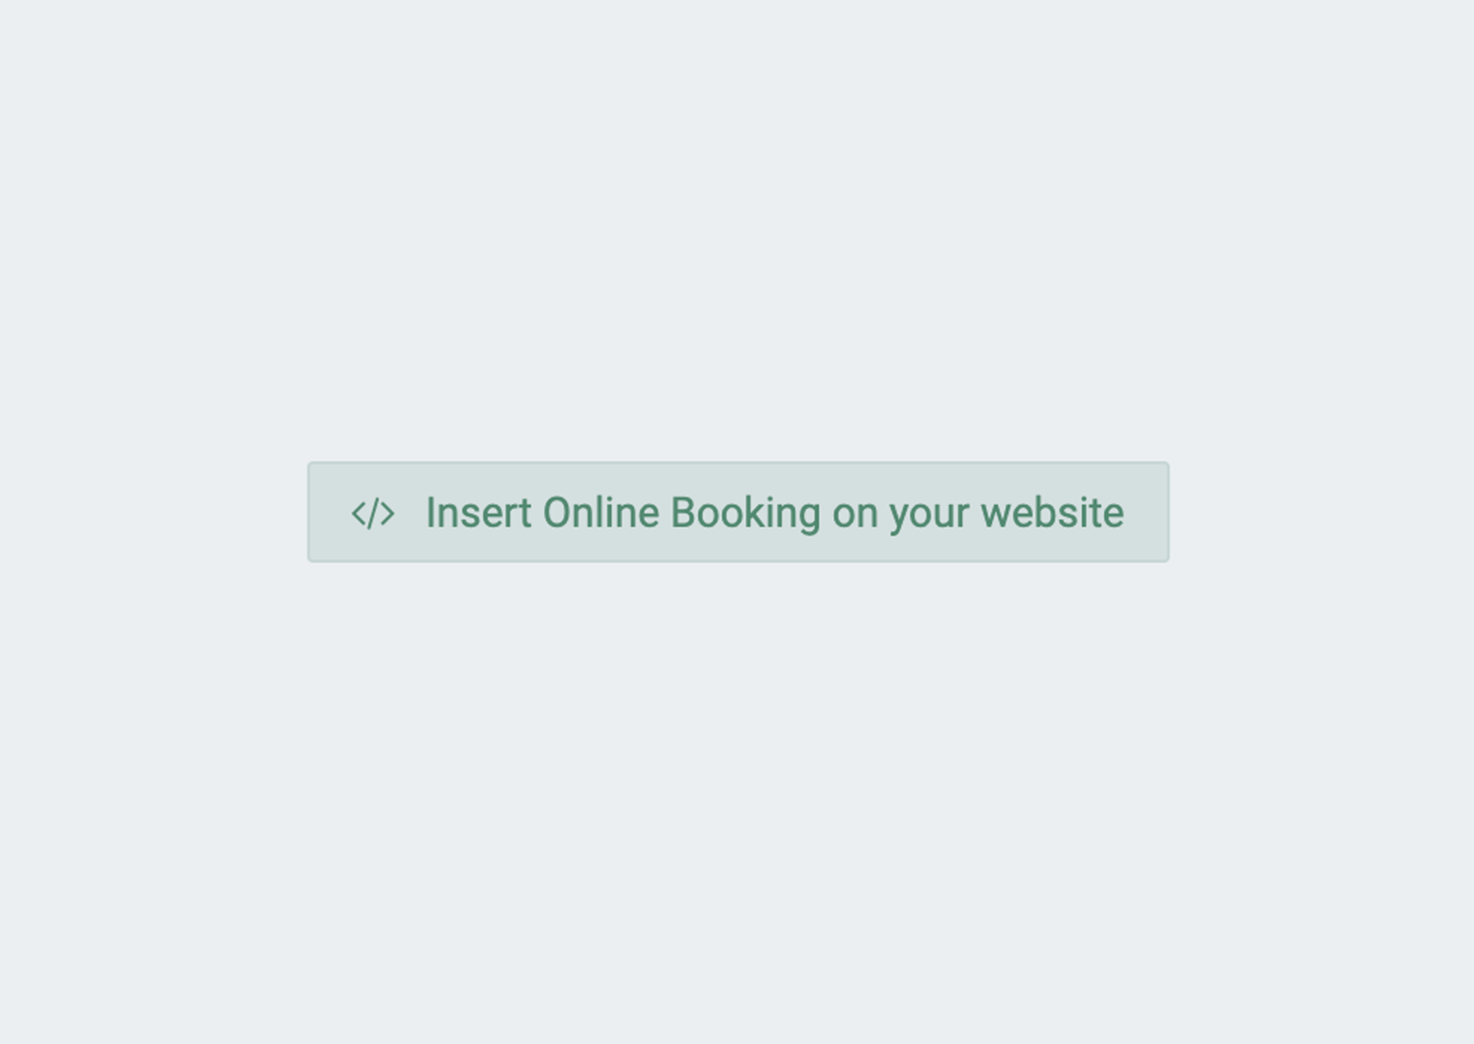 Button stating "Insert Online Booking on your website"